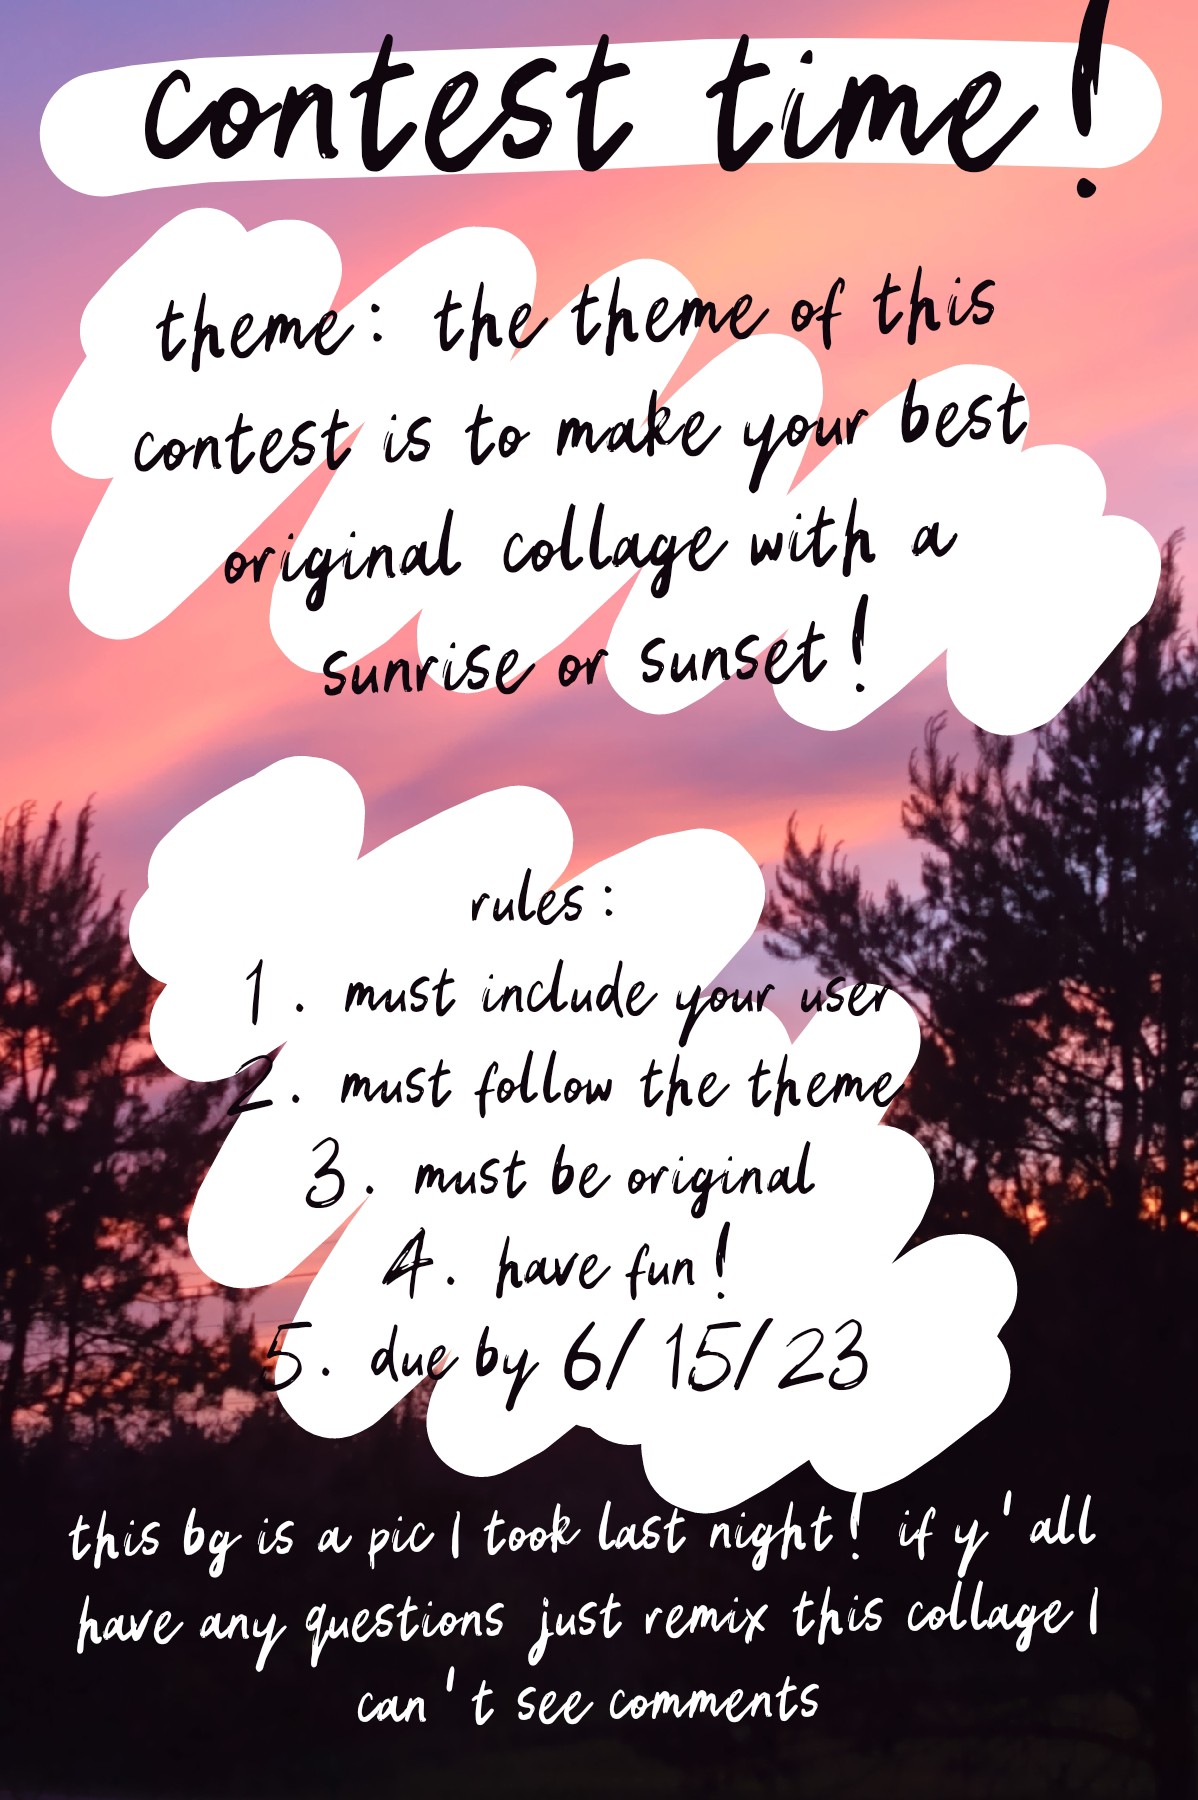 submit your collage by 6/15/2023! good luck y'all and have fun!!